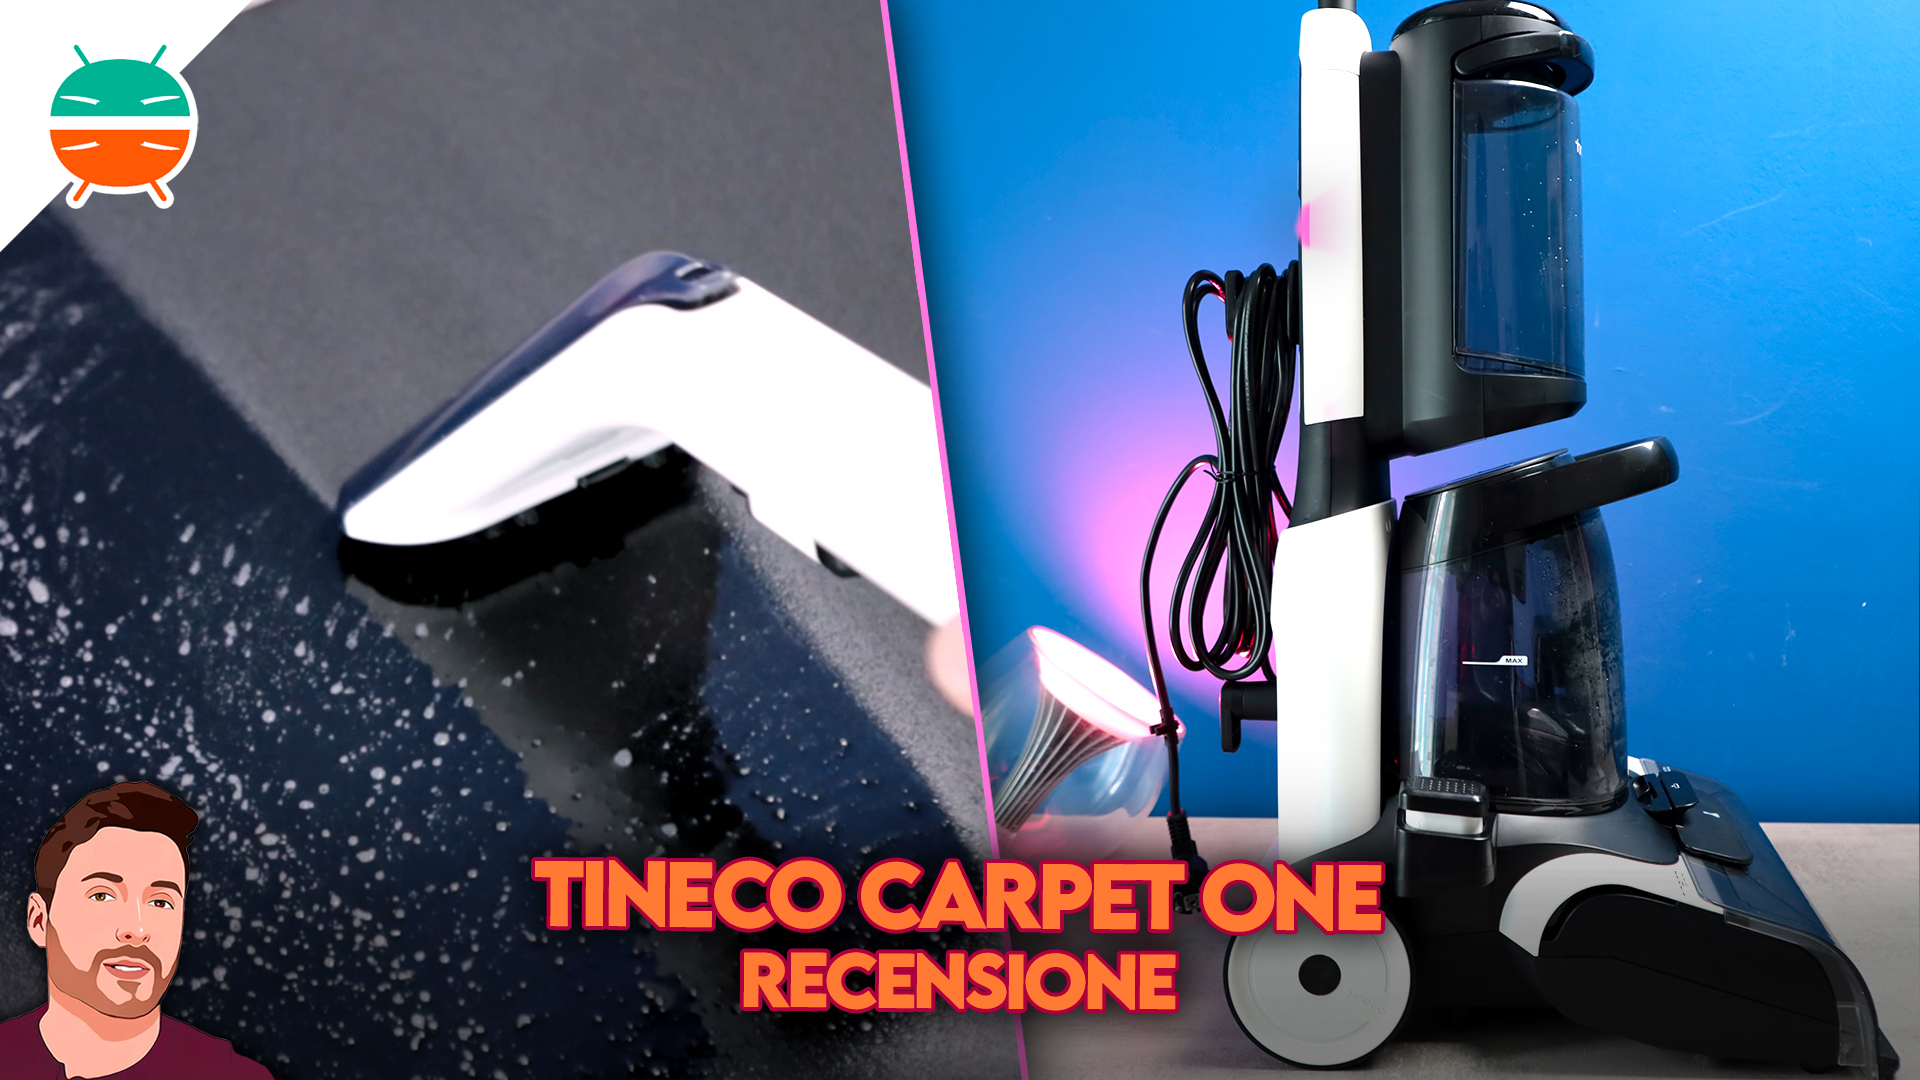 Tineco CARPET ONE review: washes rugs, carpets and sofas - GizChina.it